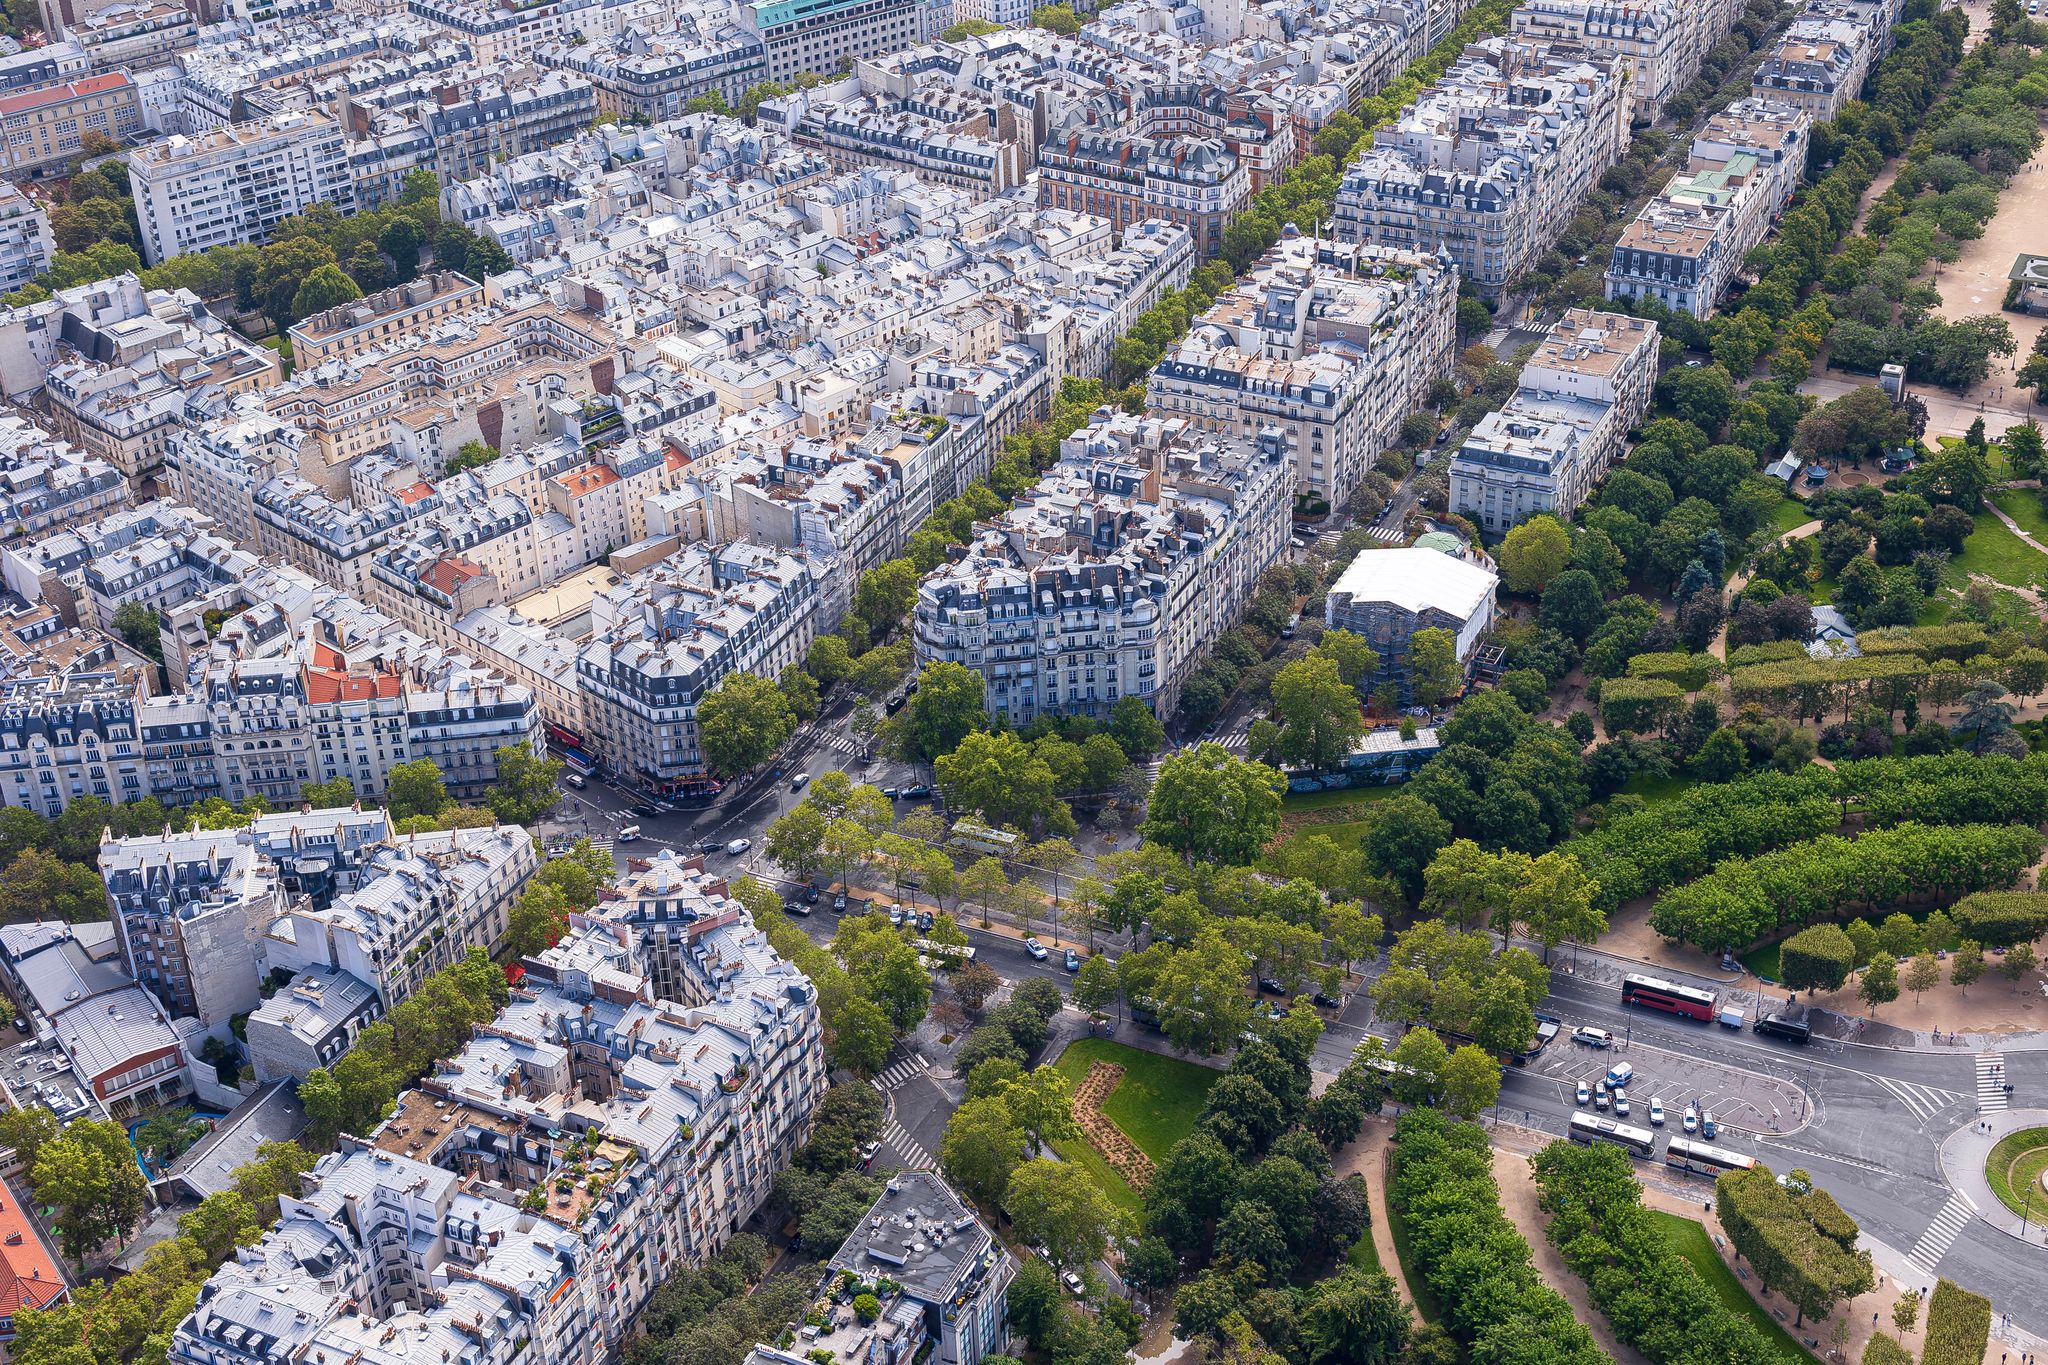 A portion (1/16th) of a larger panorama taken from the Eiffel Tower